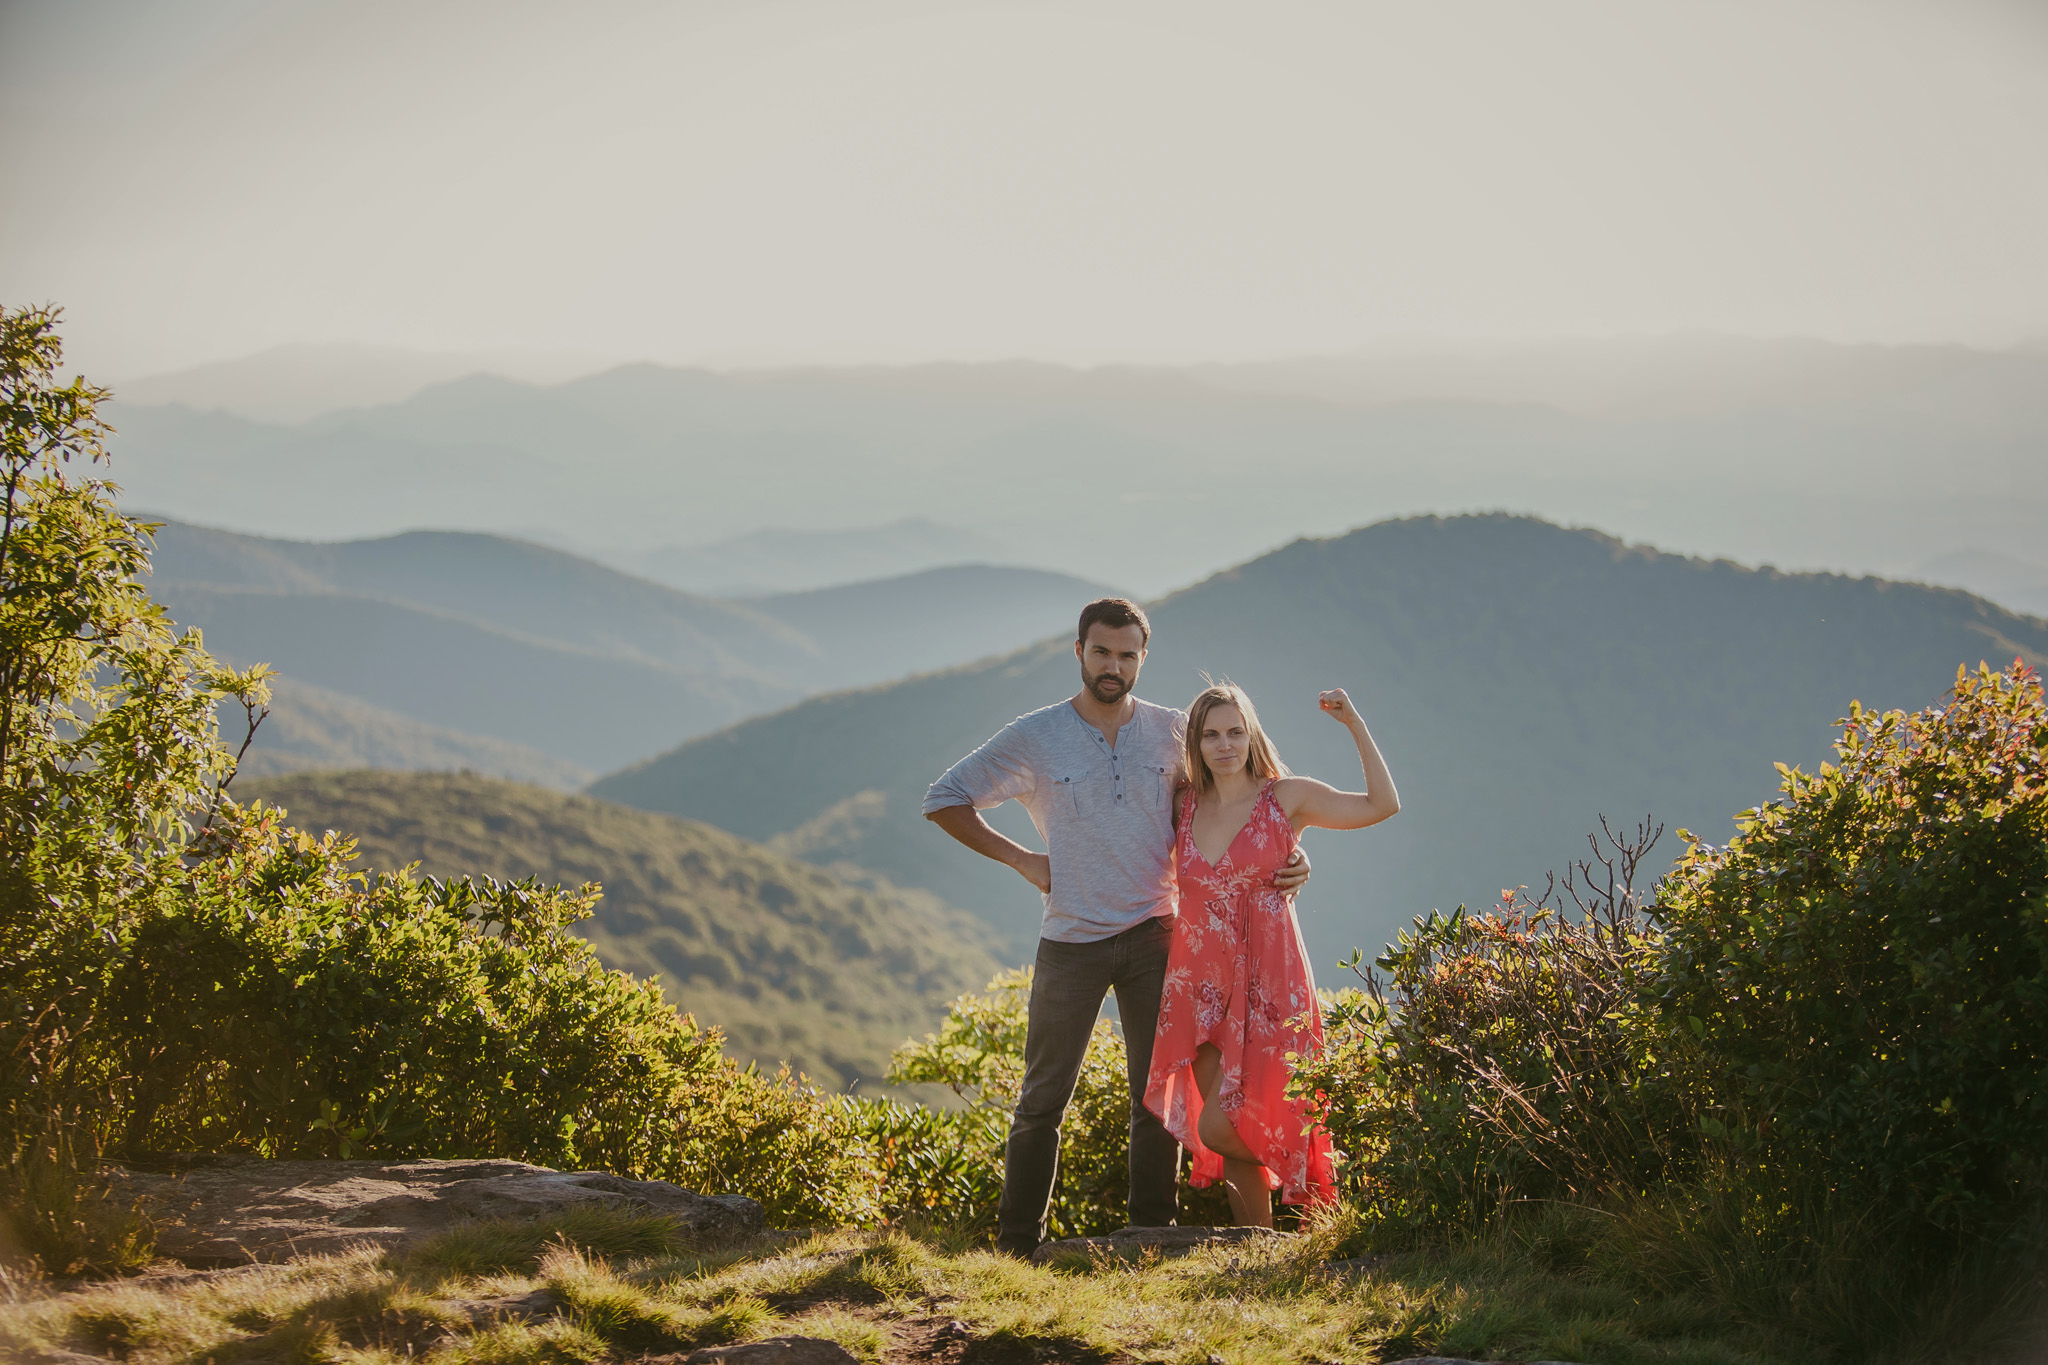 The Appalachian mountains make a great backdrop for this couple's session in Asheville, NC